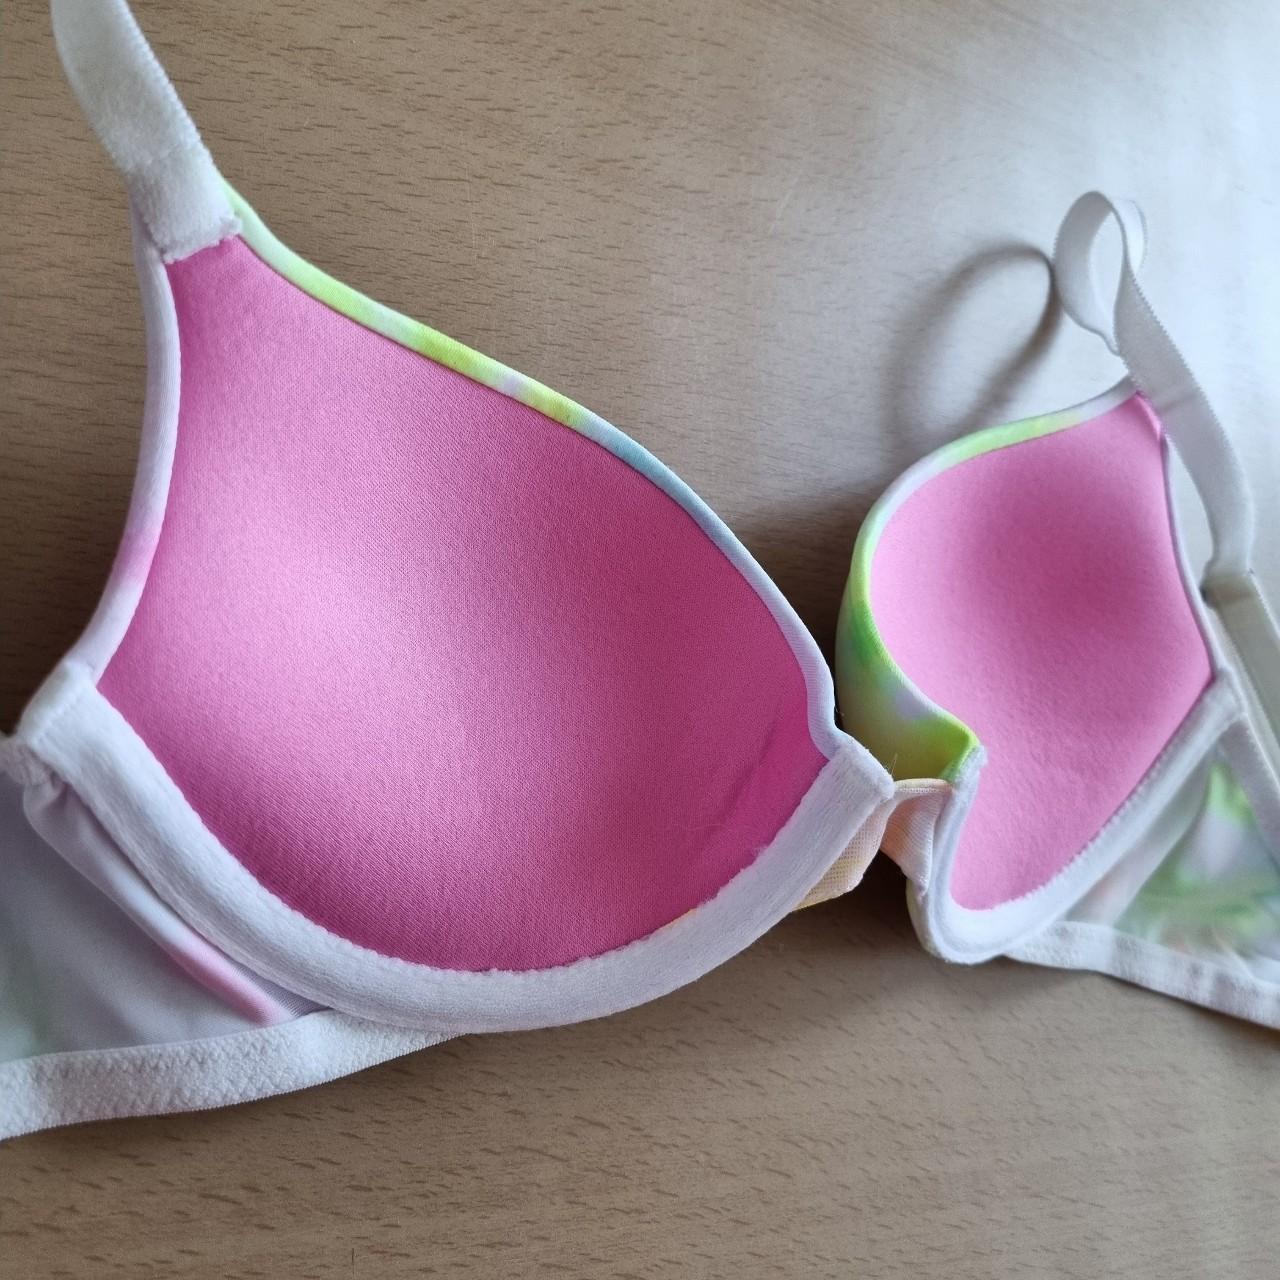 Victoria secrets push up bra. 32A. New with tags